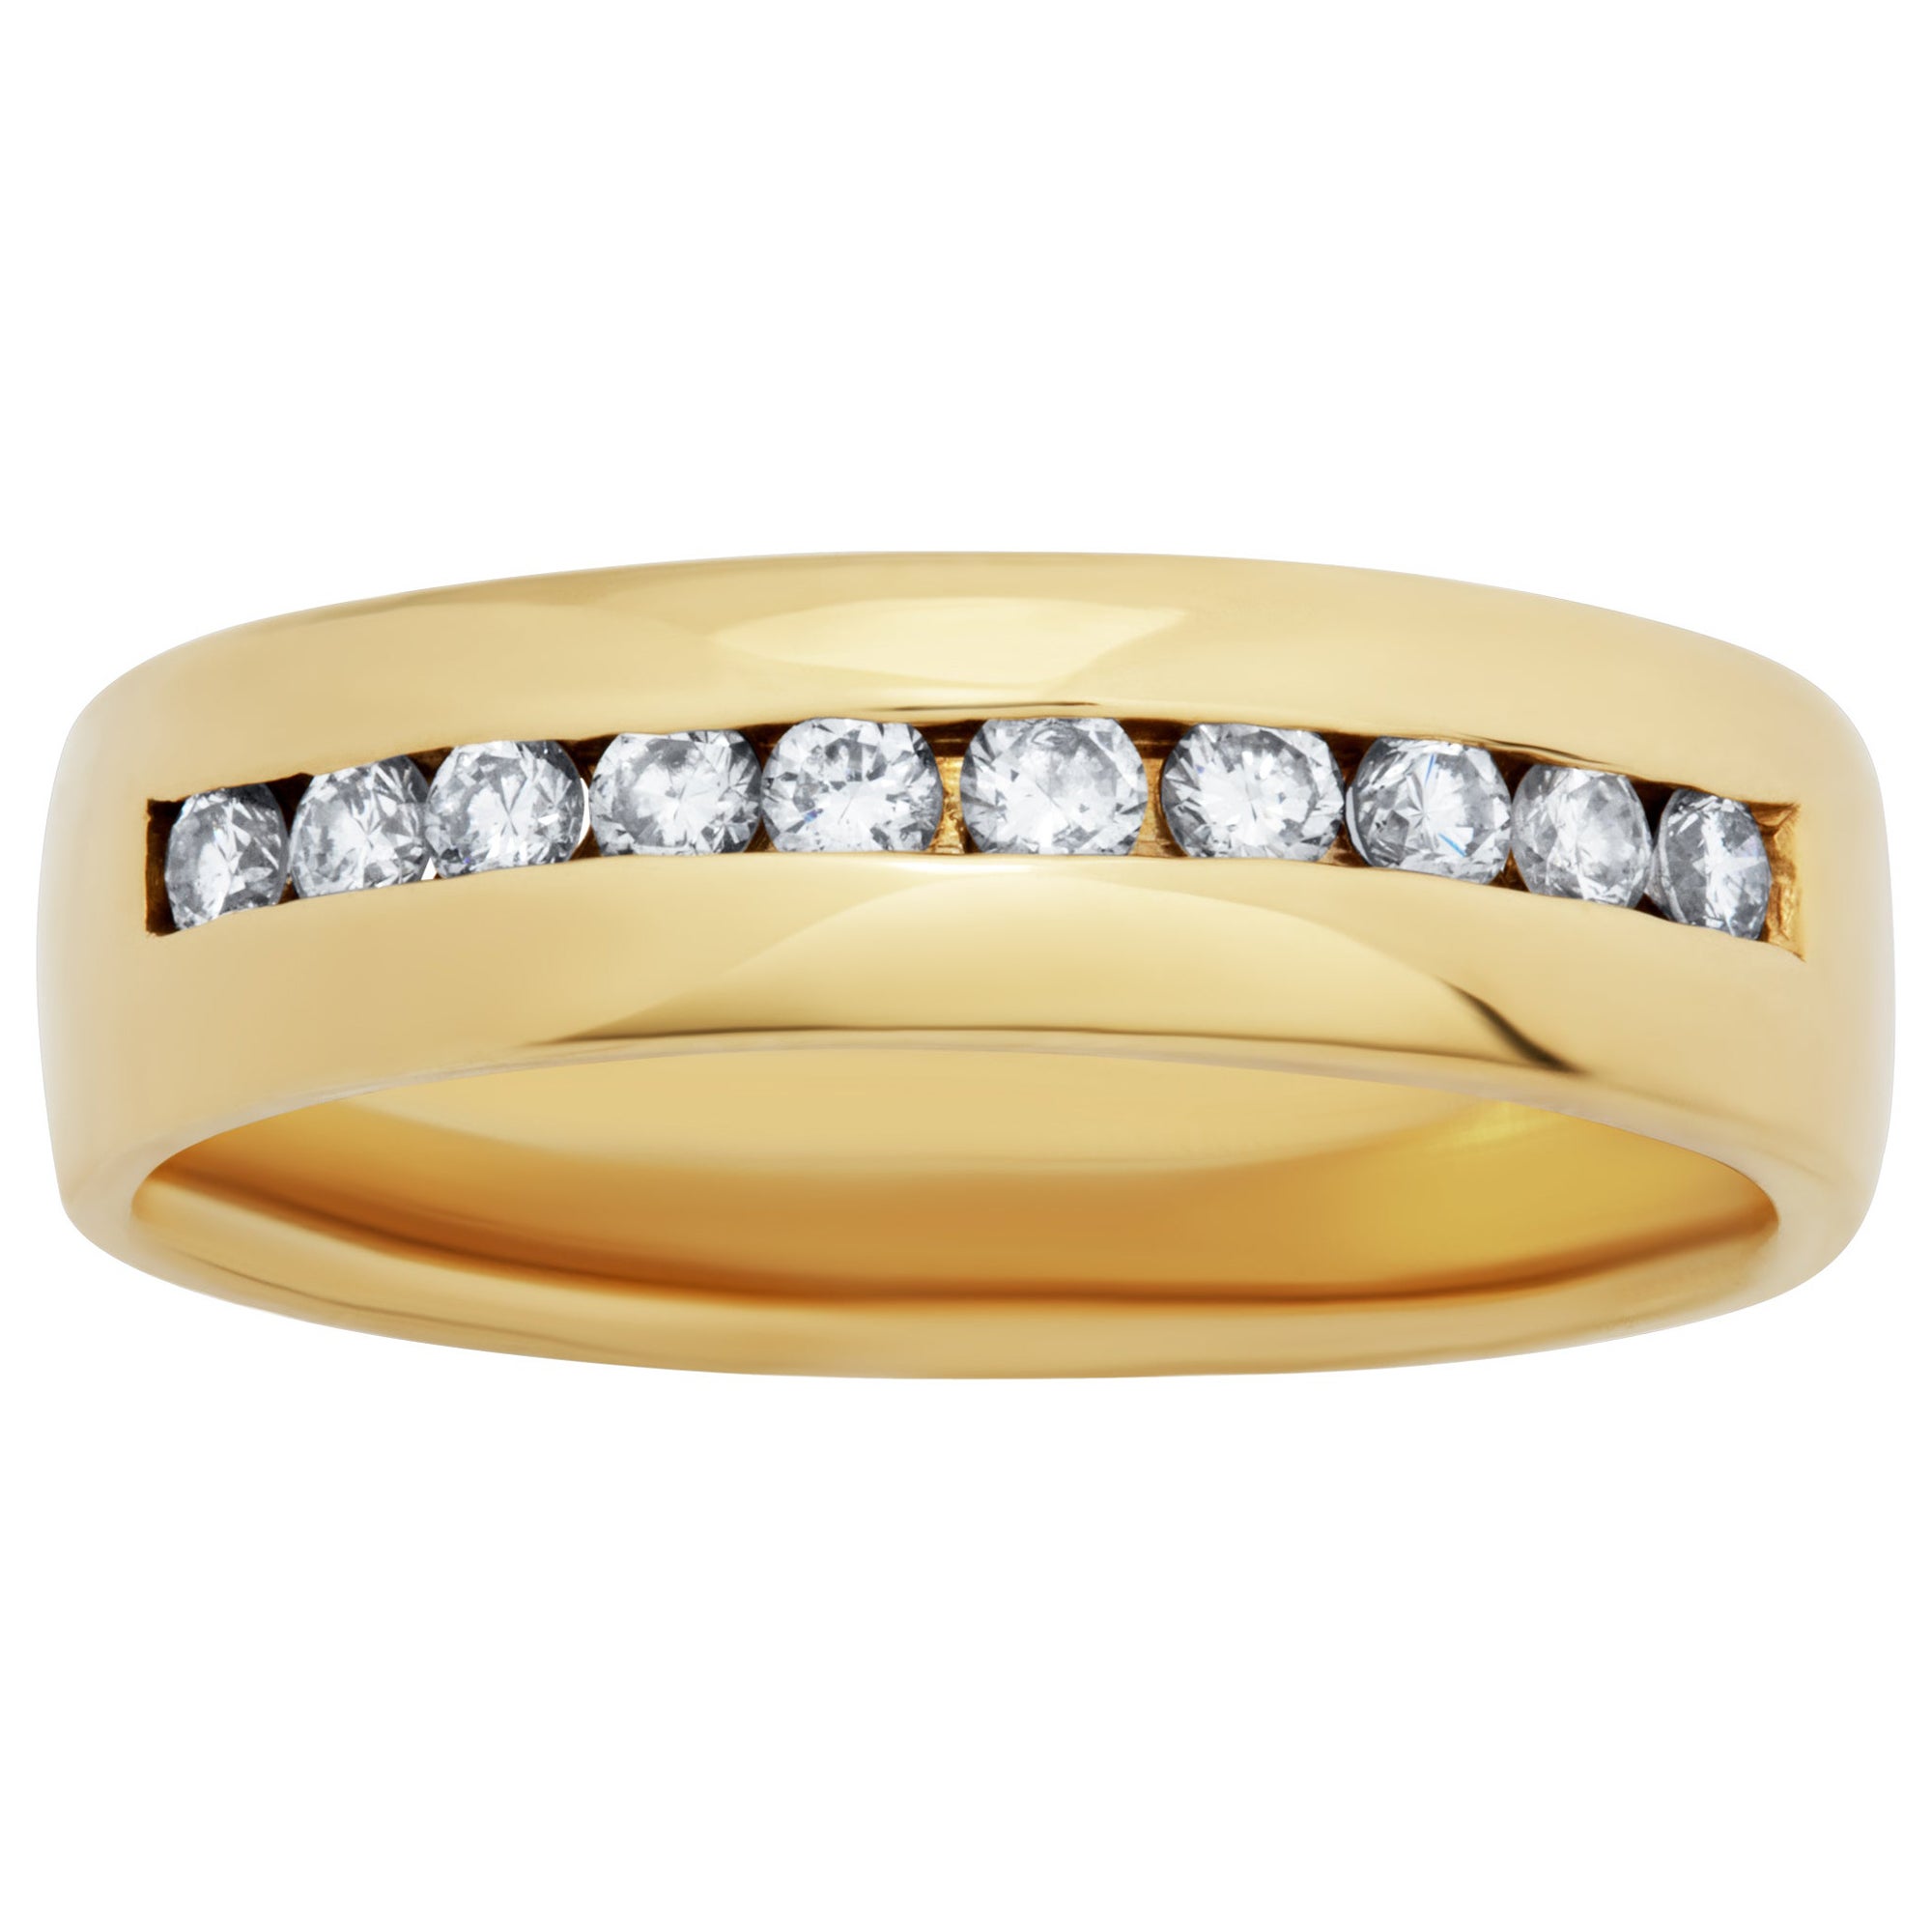 Semi Diamond Eternity Band and Ring in 14k yellow gold. 0.50 carats in channel 